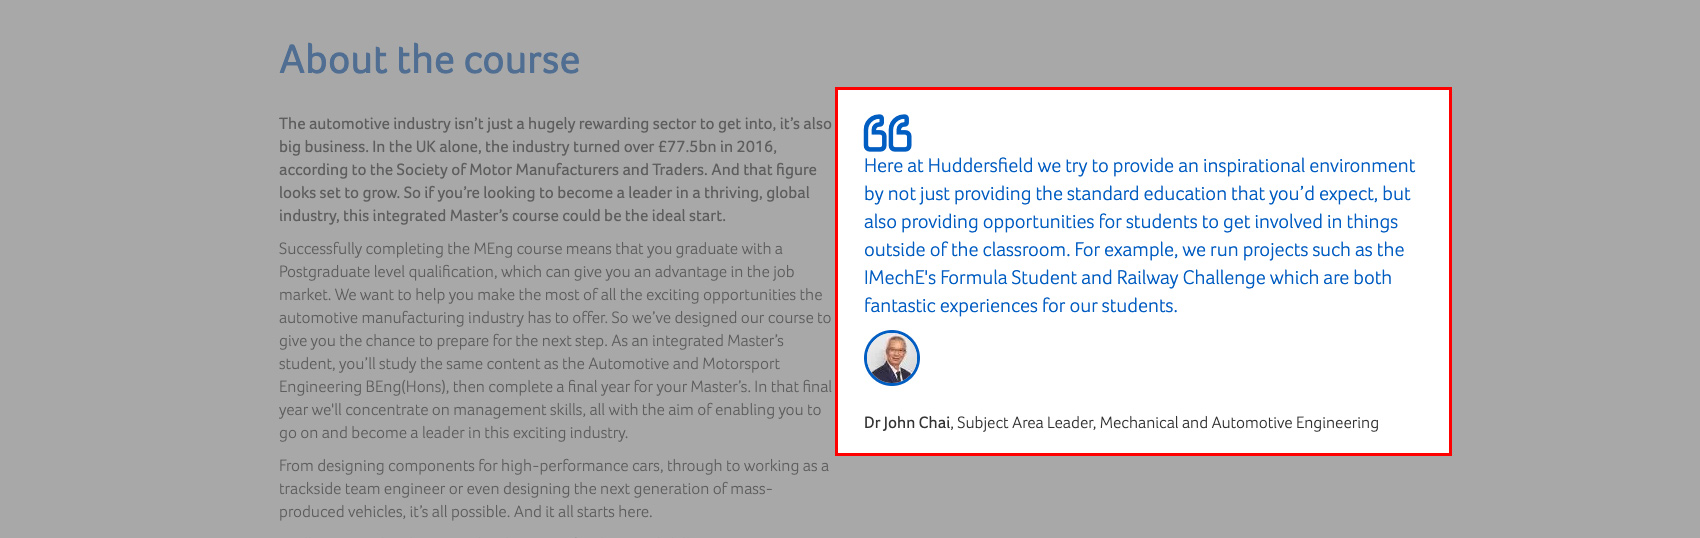 A screenshot of the coursefinder application with the quote/endorsement area highlighted.  